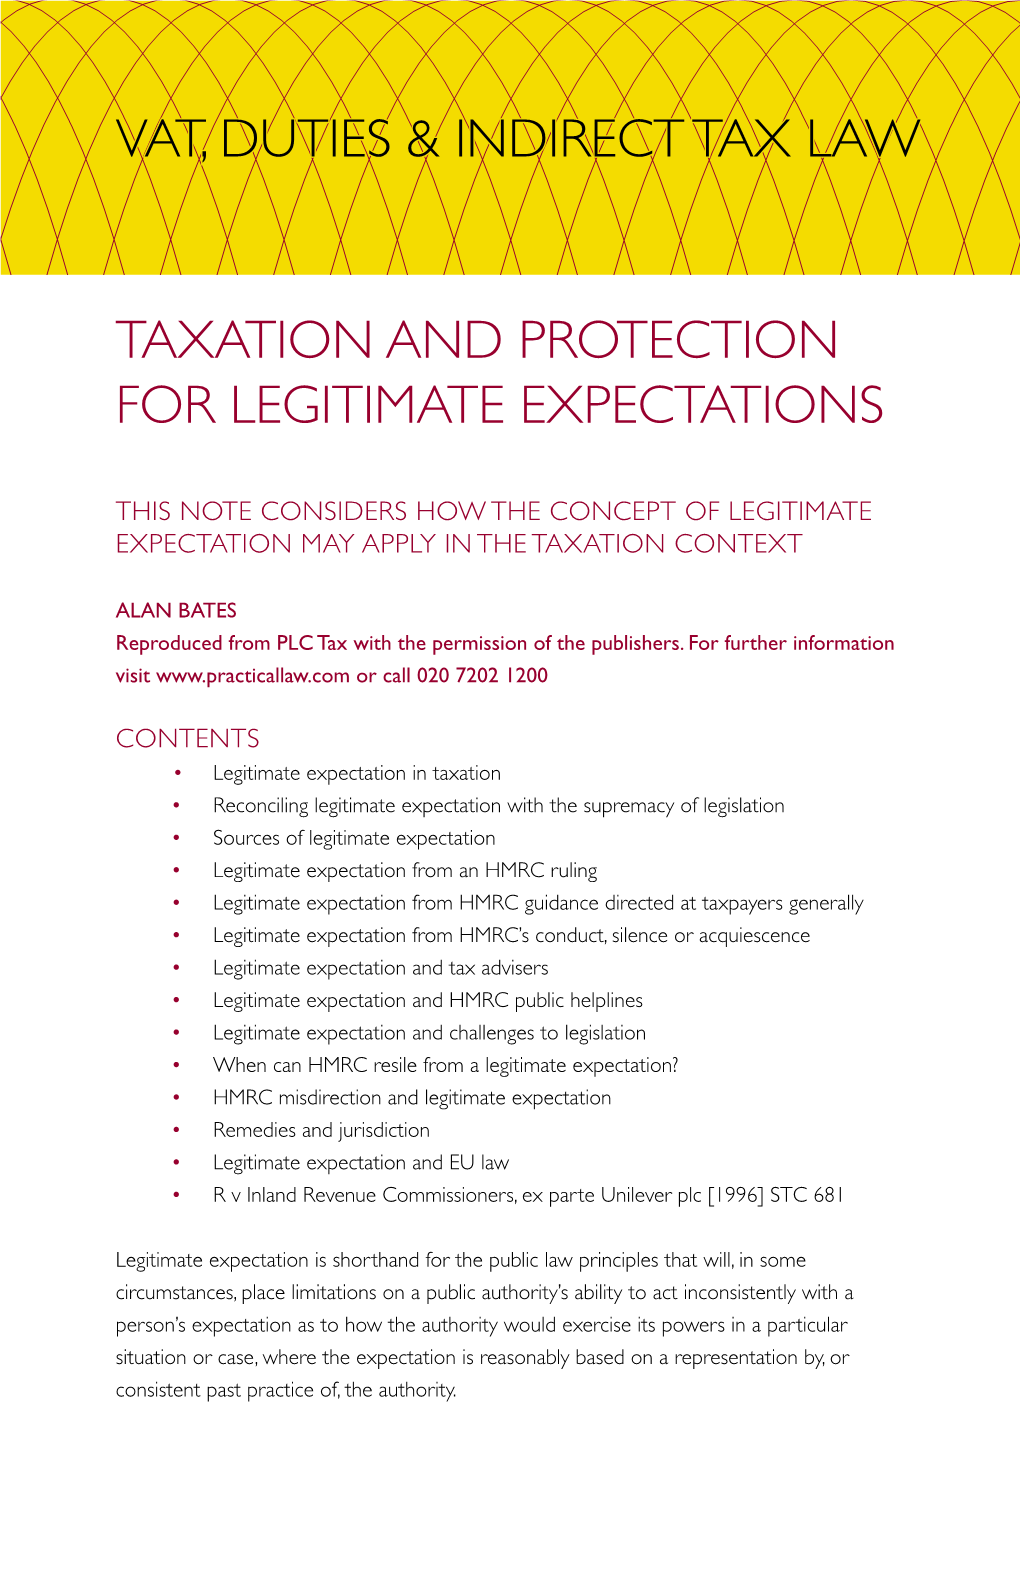 Taxation and Protection for Legitimate Expectations Vat, Duties & Indirect